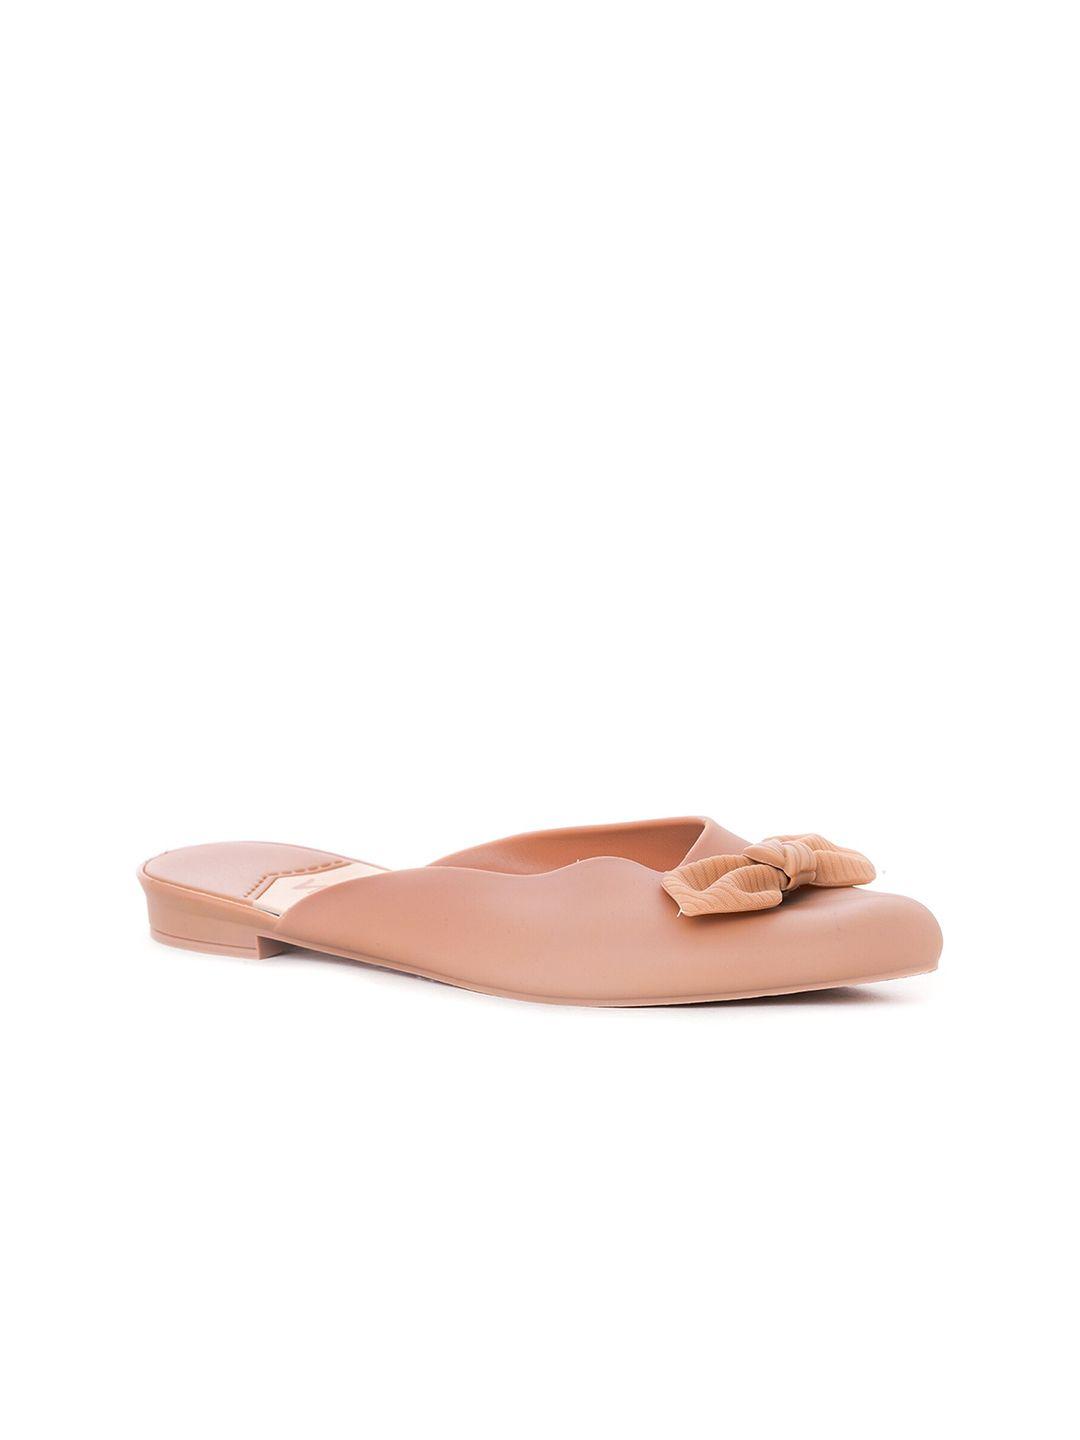 khadims women rose gold mules with bows flats